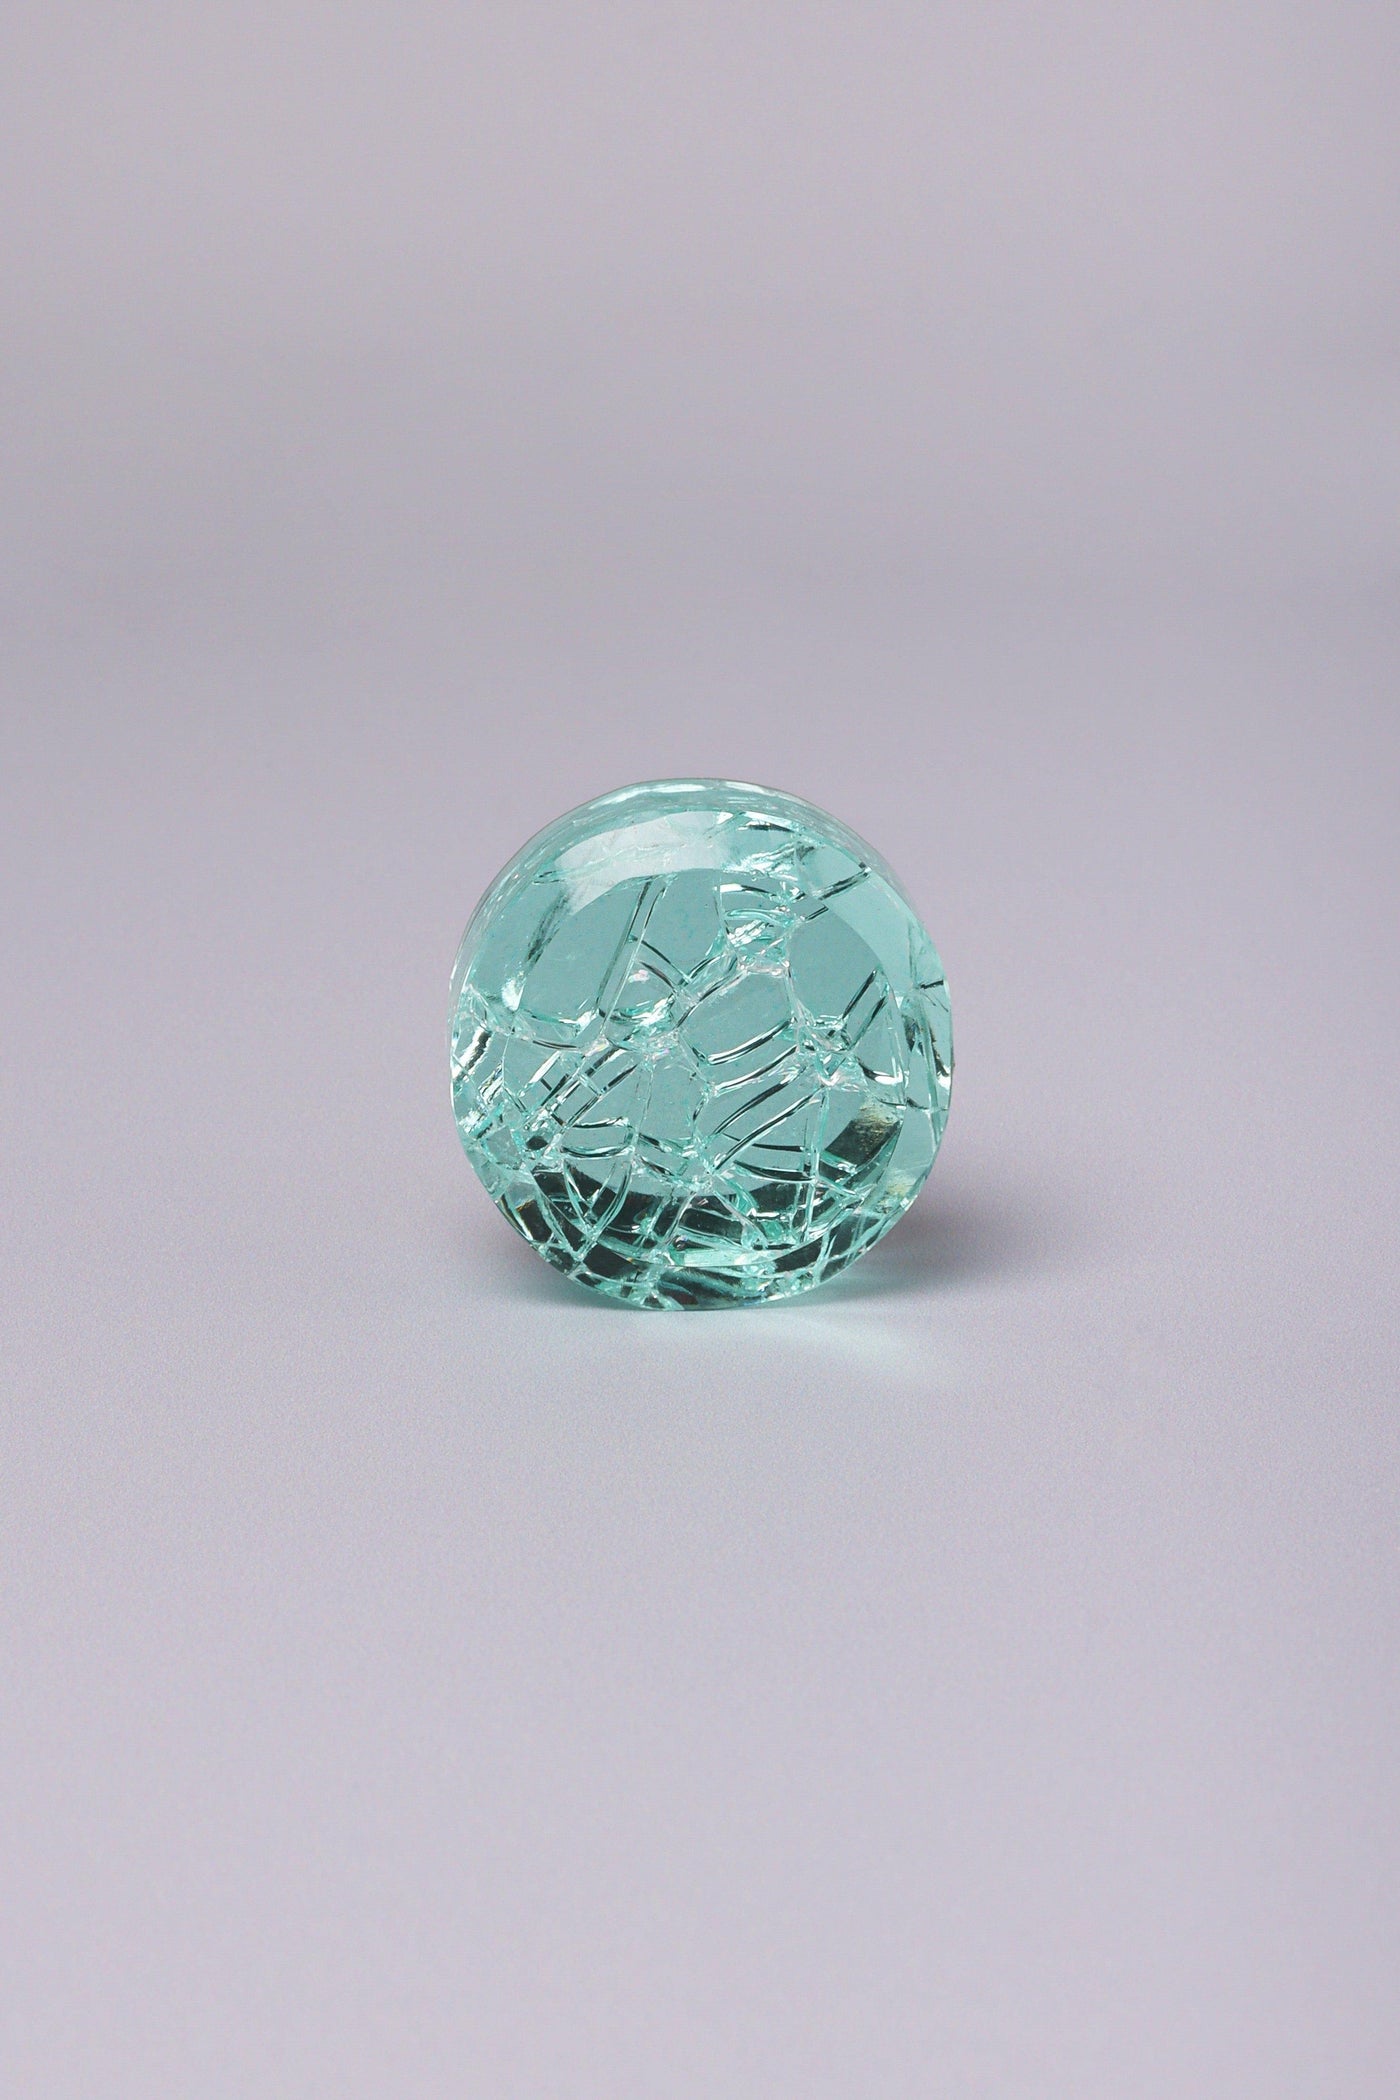 G Decor Cabinet Knobs & Handles Light Blue Round Maison Crystal Crackle Mirror Glass Pull Knobs